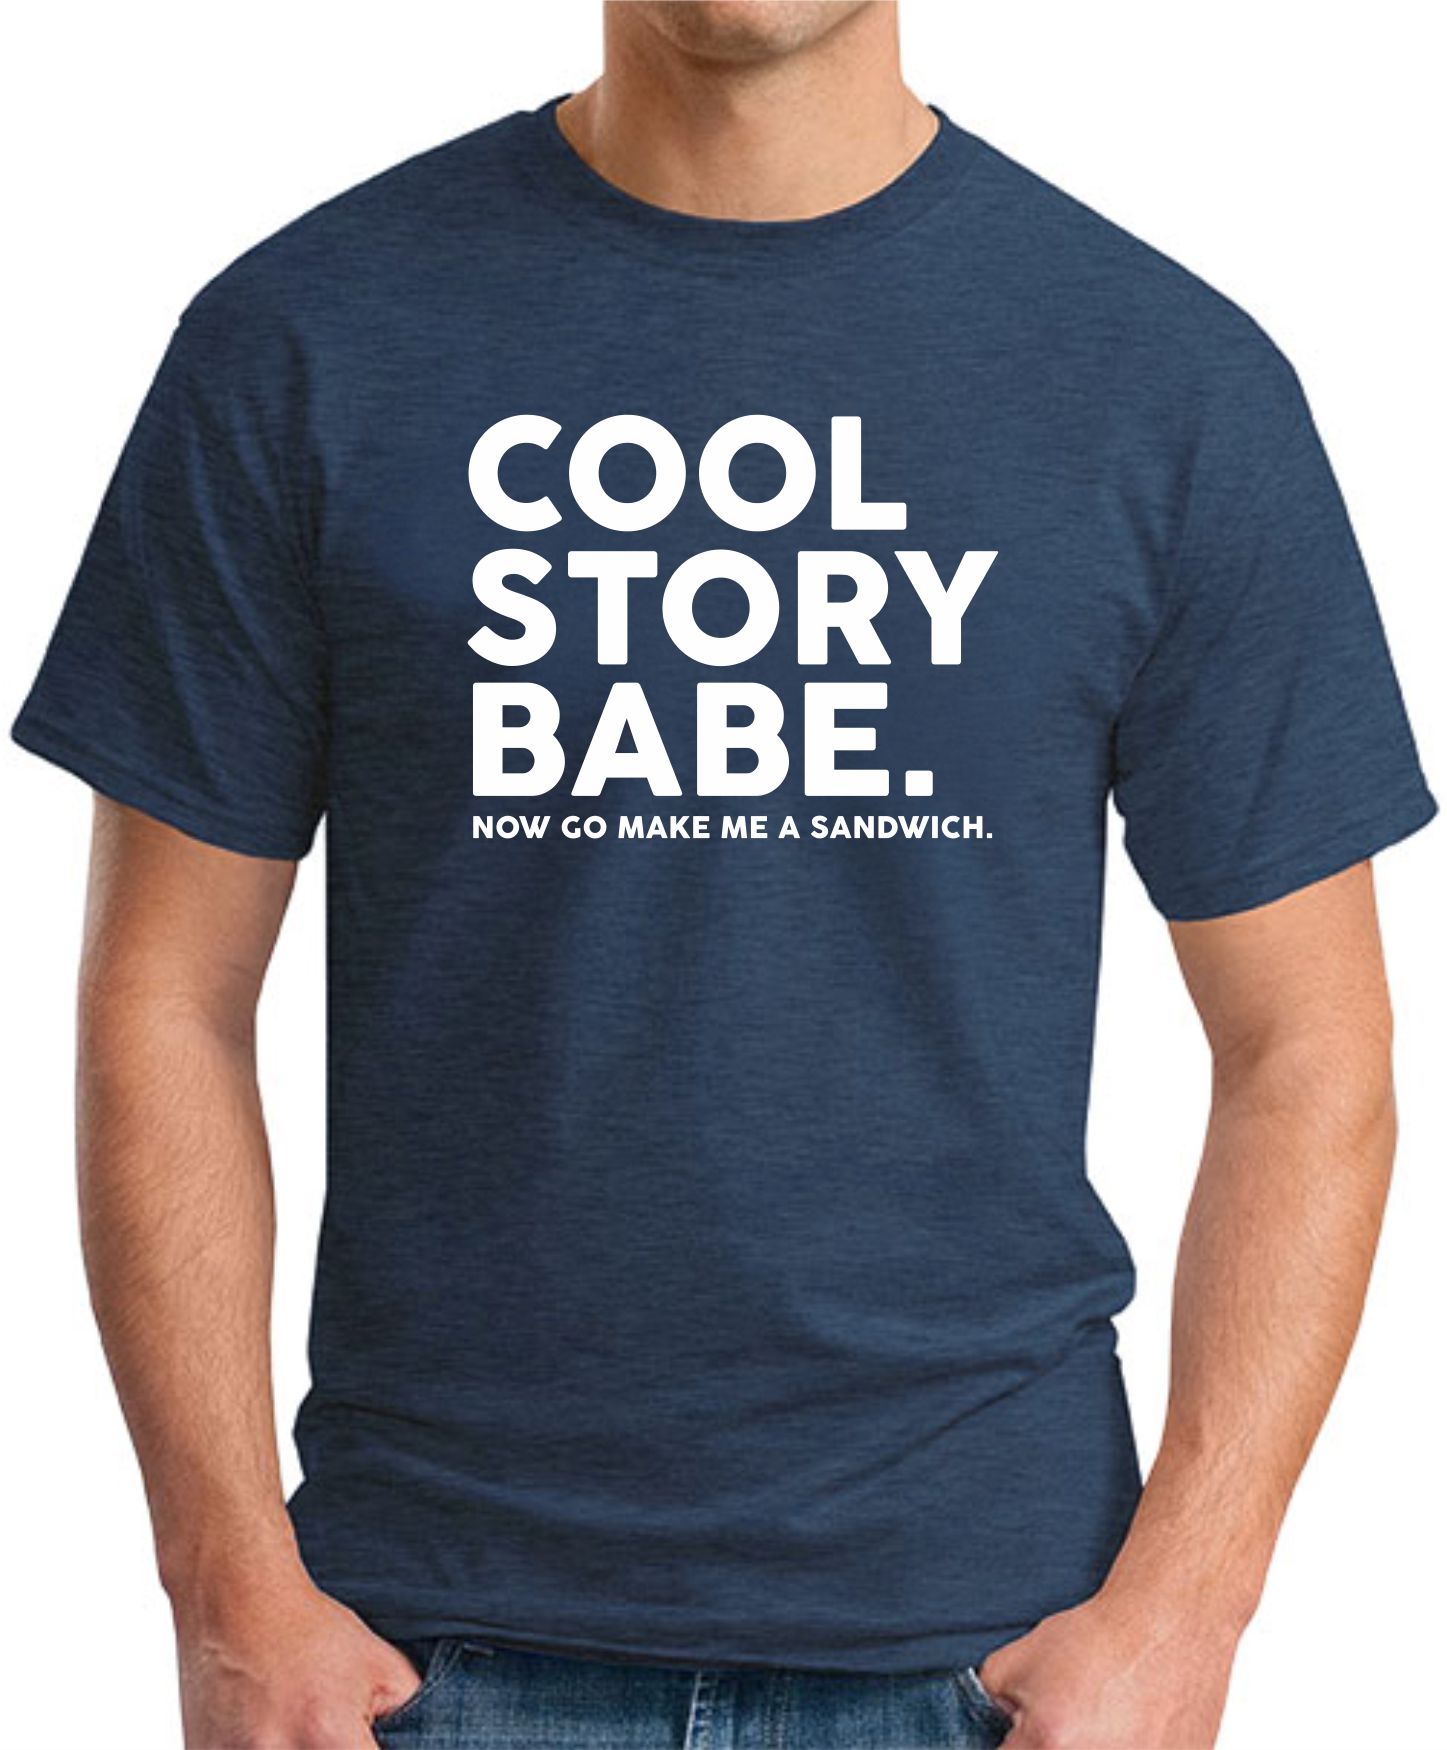 COOL STORY BABE NOW GO MAKE ME A SANDWICH T-SHIRT - GeekyTees